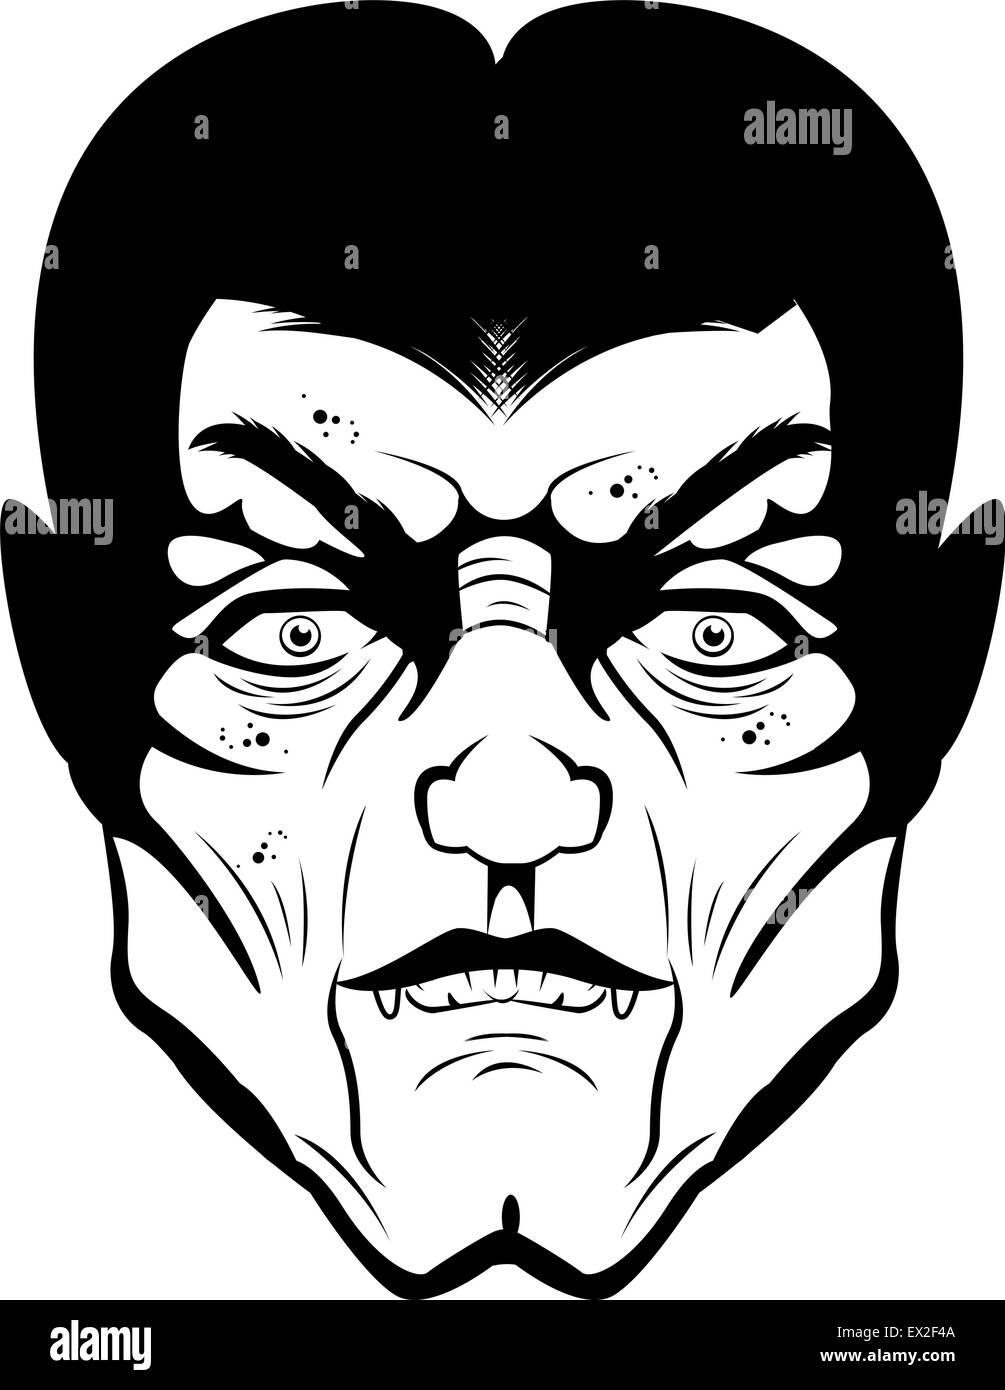 A black and white vampire face illustration. Stock Vector